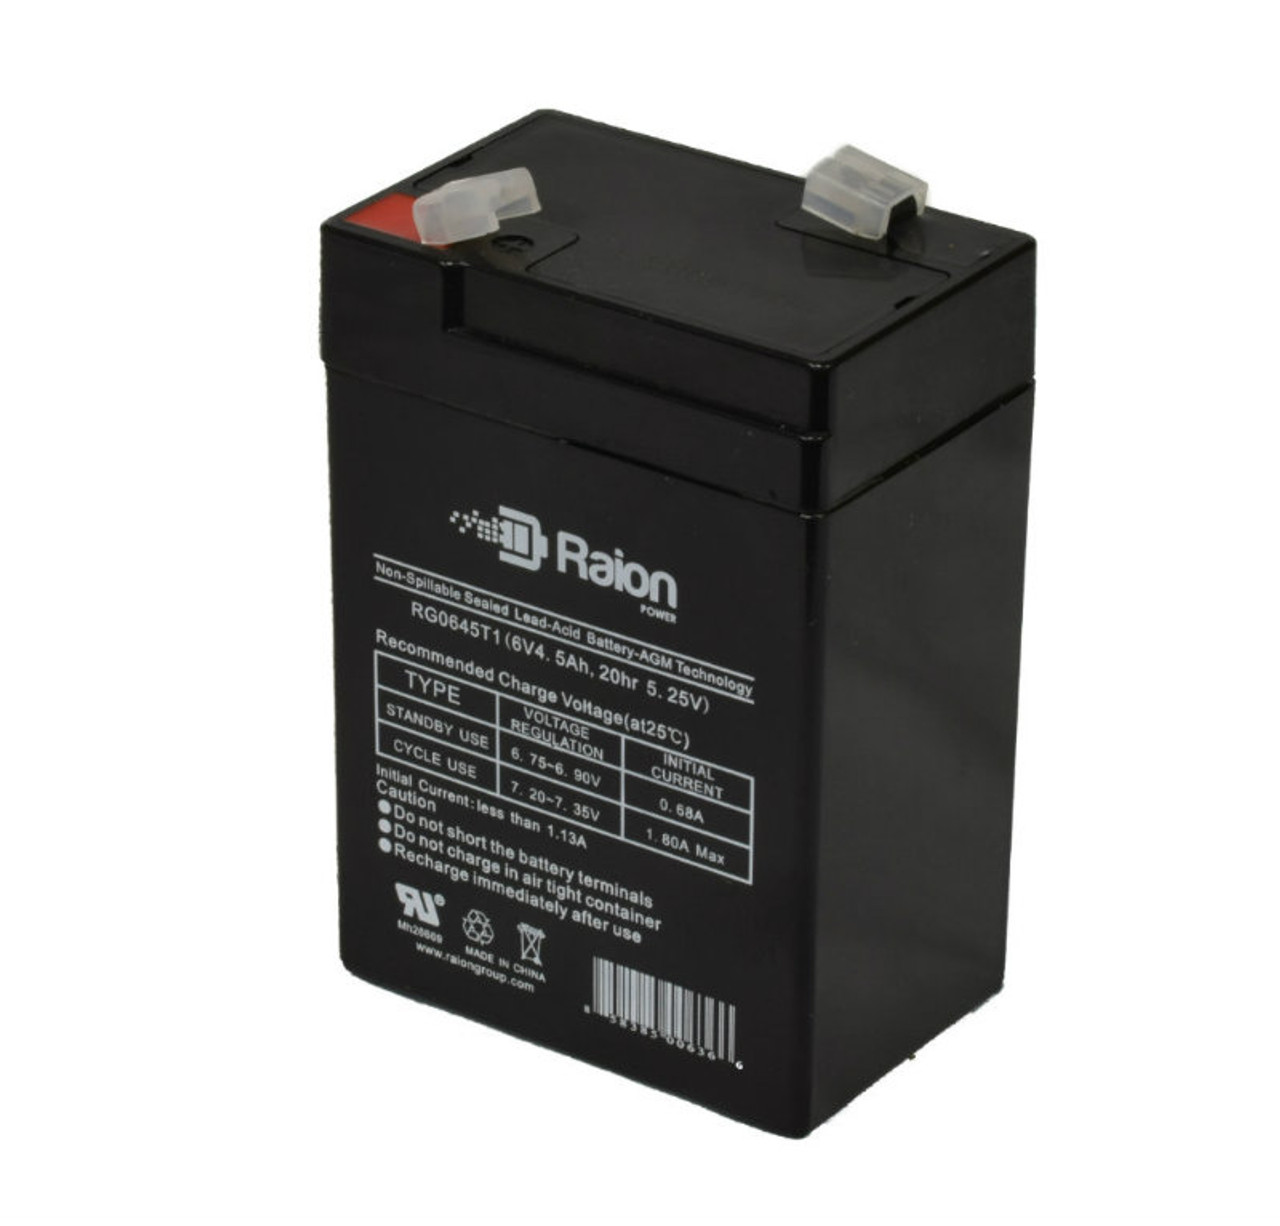 Raion Power RG0645T1 6V 4.5Ah Replacement Battery Cartridge for Sunnyway SW650